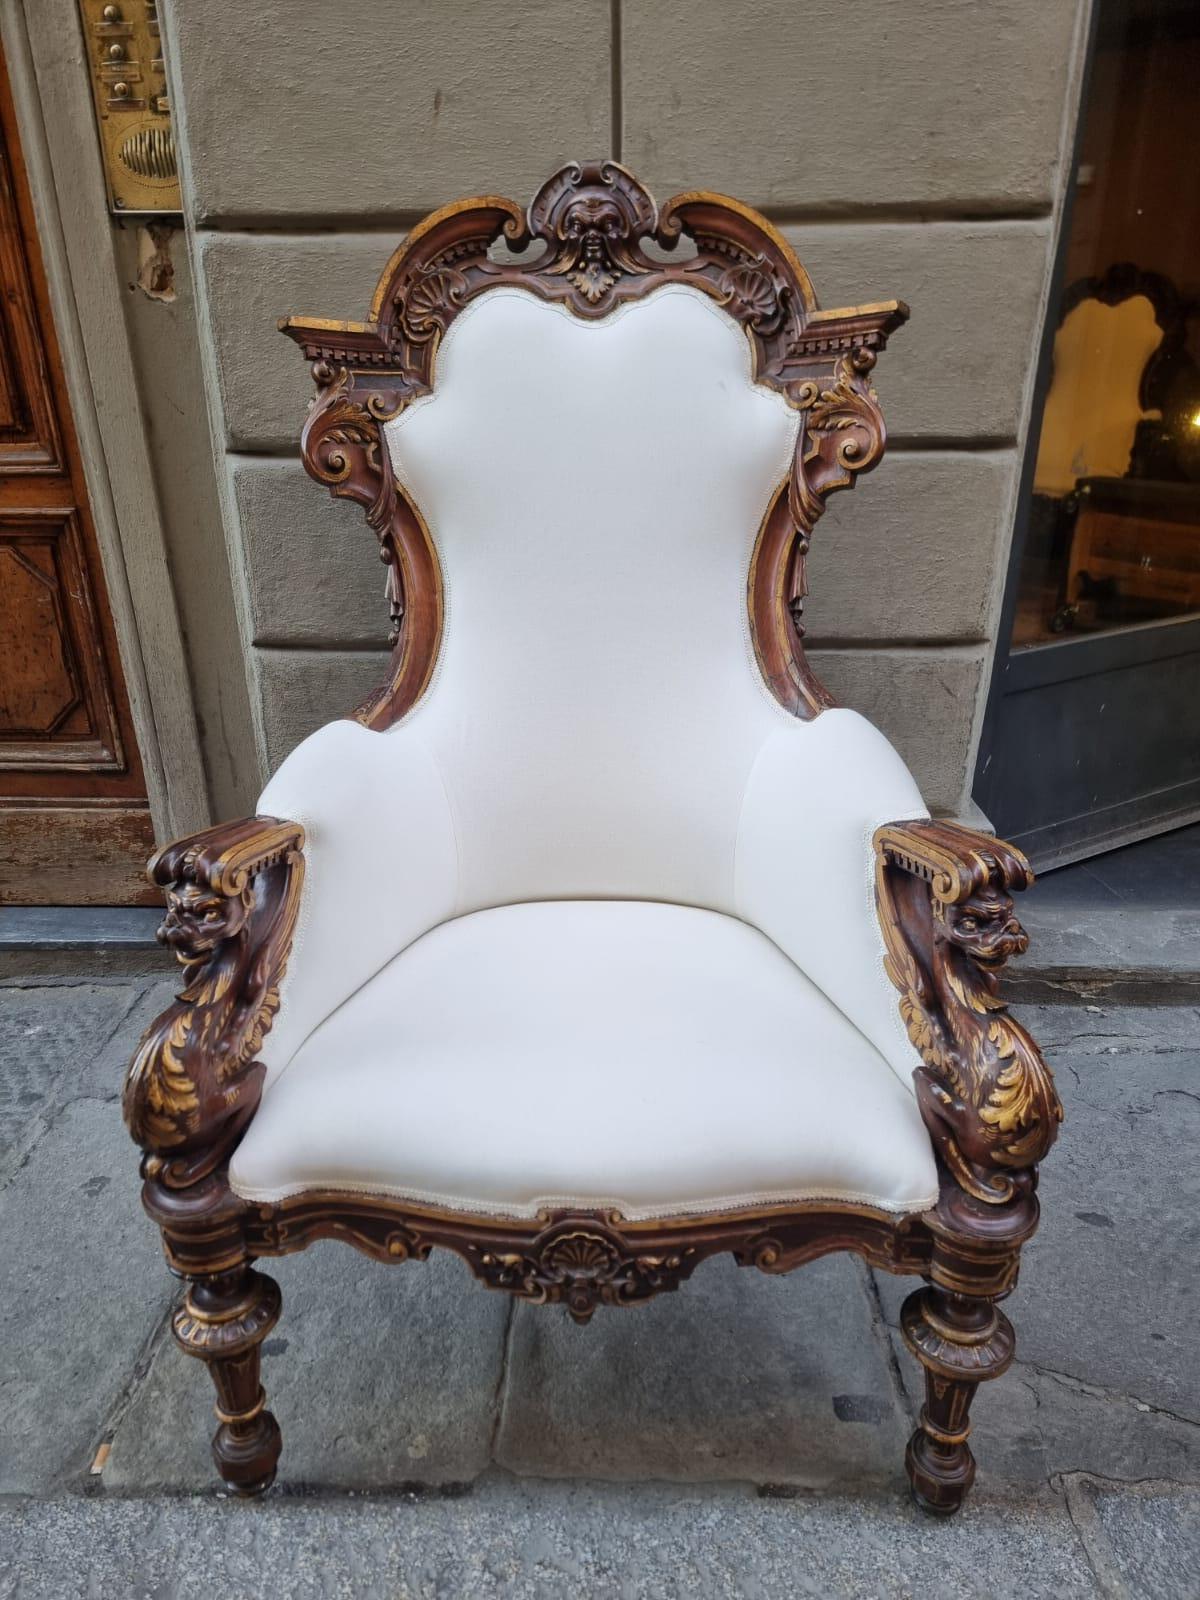 Exceptional pair of carved walnut armchairs with gilt parts.

The carvings on both armchairs are of extraordinary refinement, with finely worked details extending to all elements, including finely shaped armrests and legs, creating a visual harmony